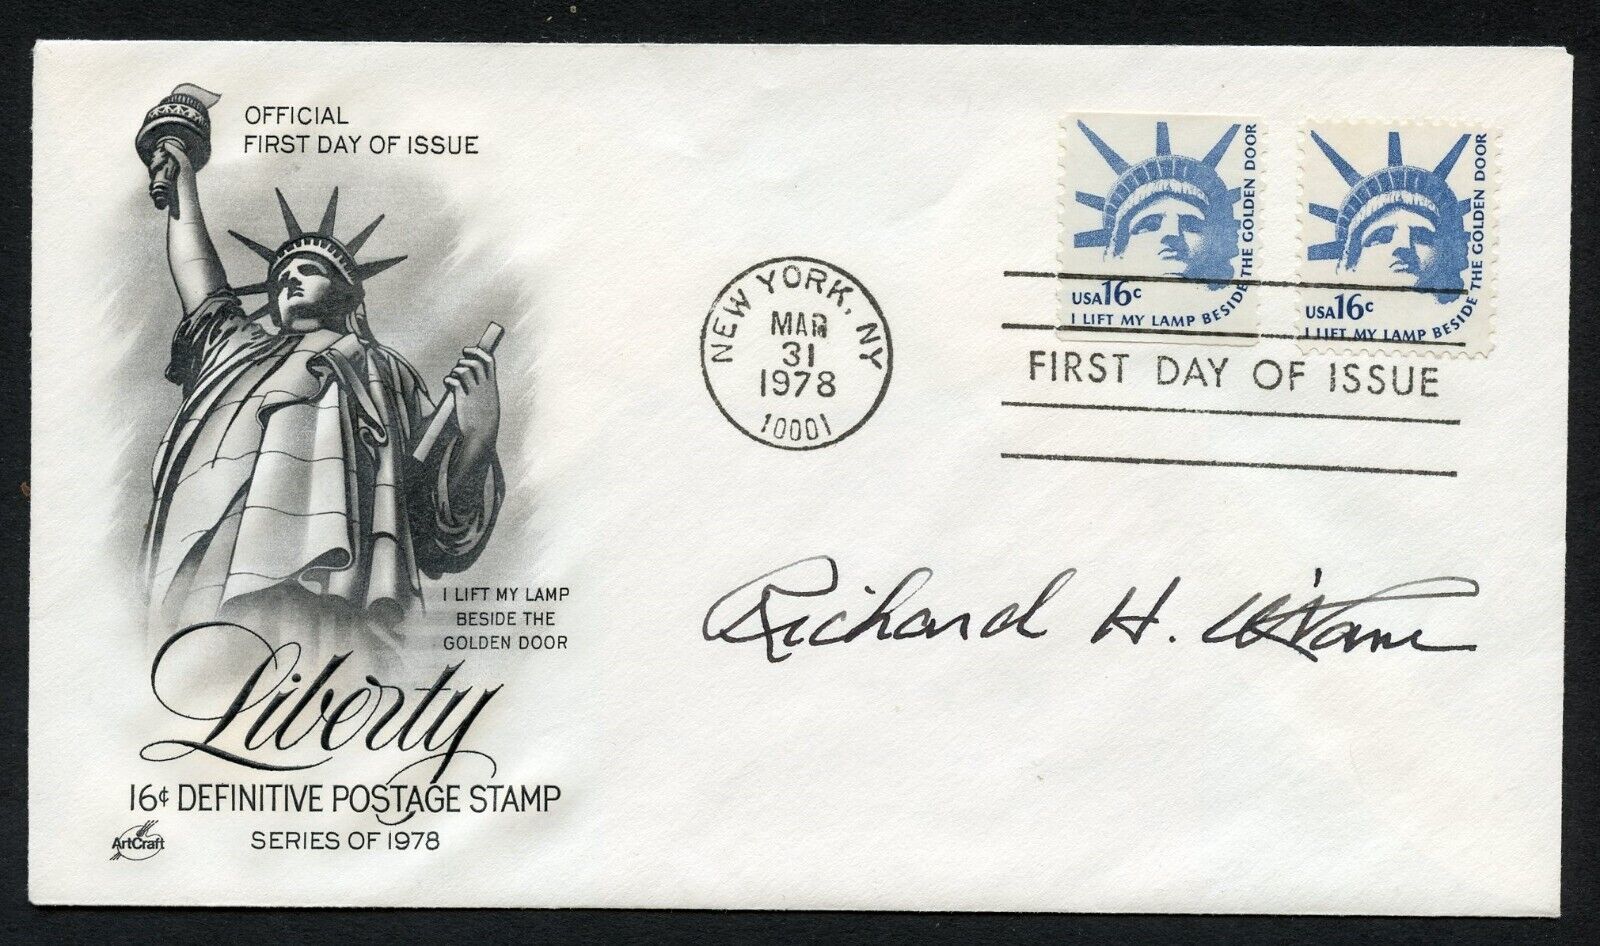 Richard O'Kane d1994 signed autograph FDC Medal of Honor Recipient USN WWII BAS